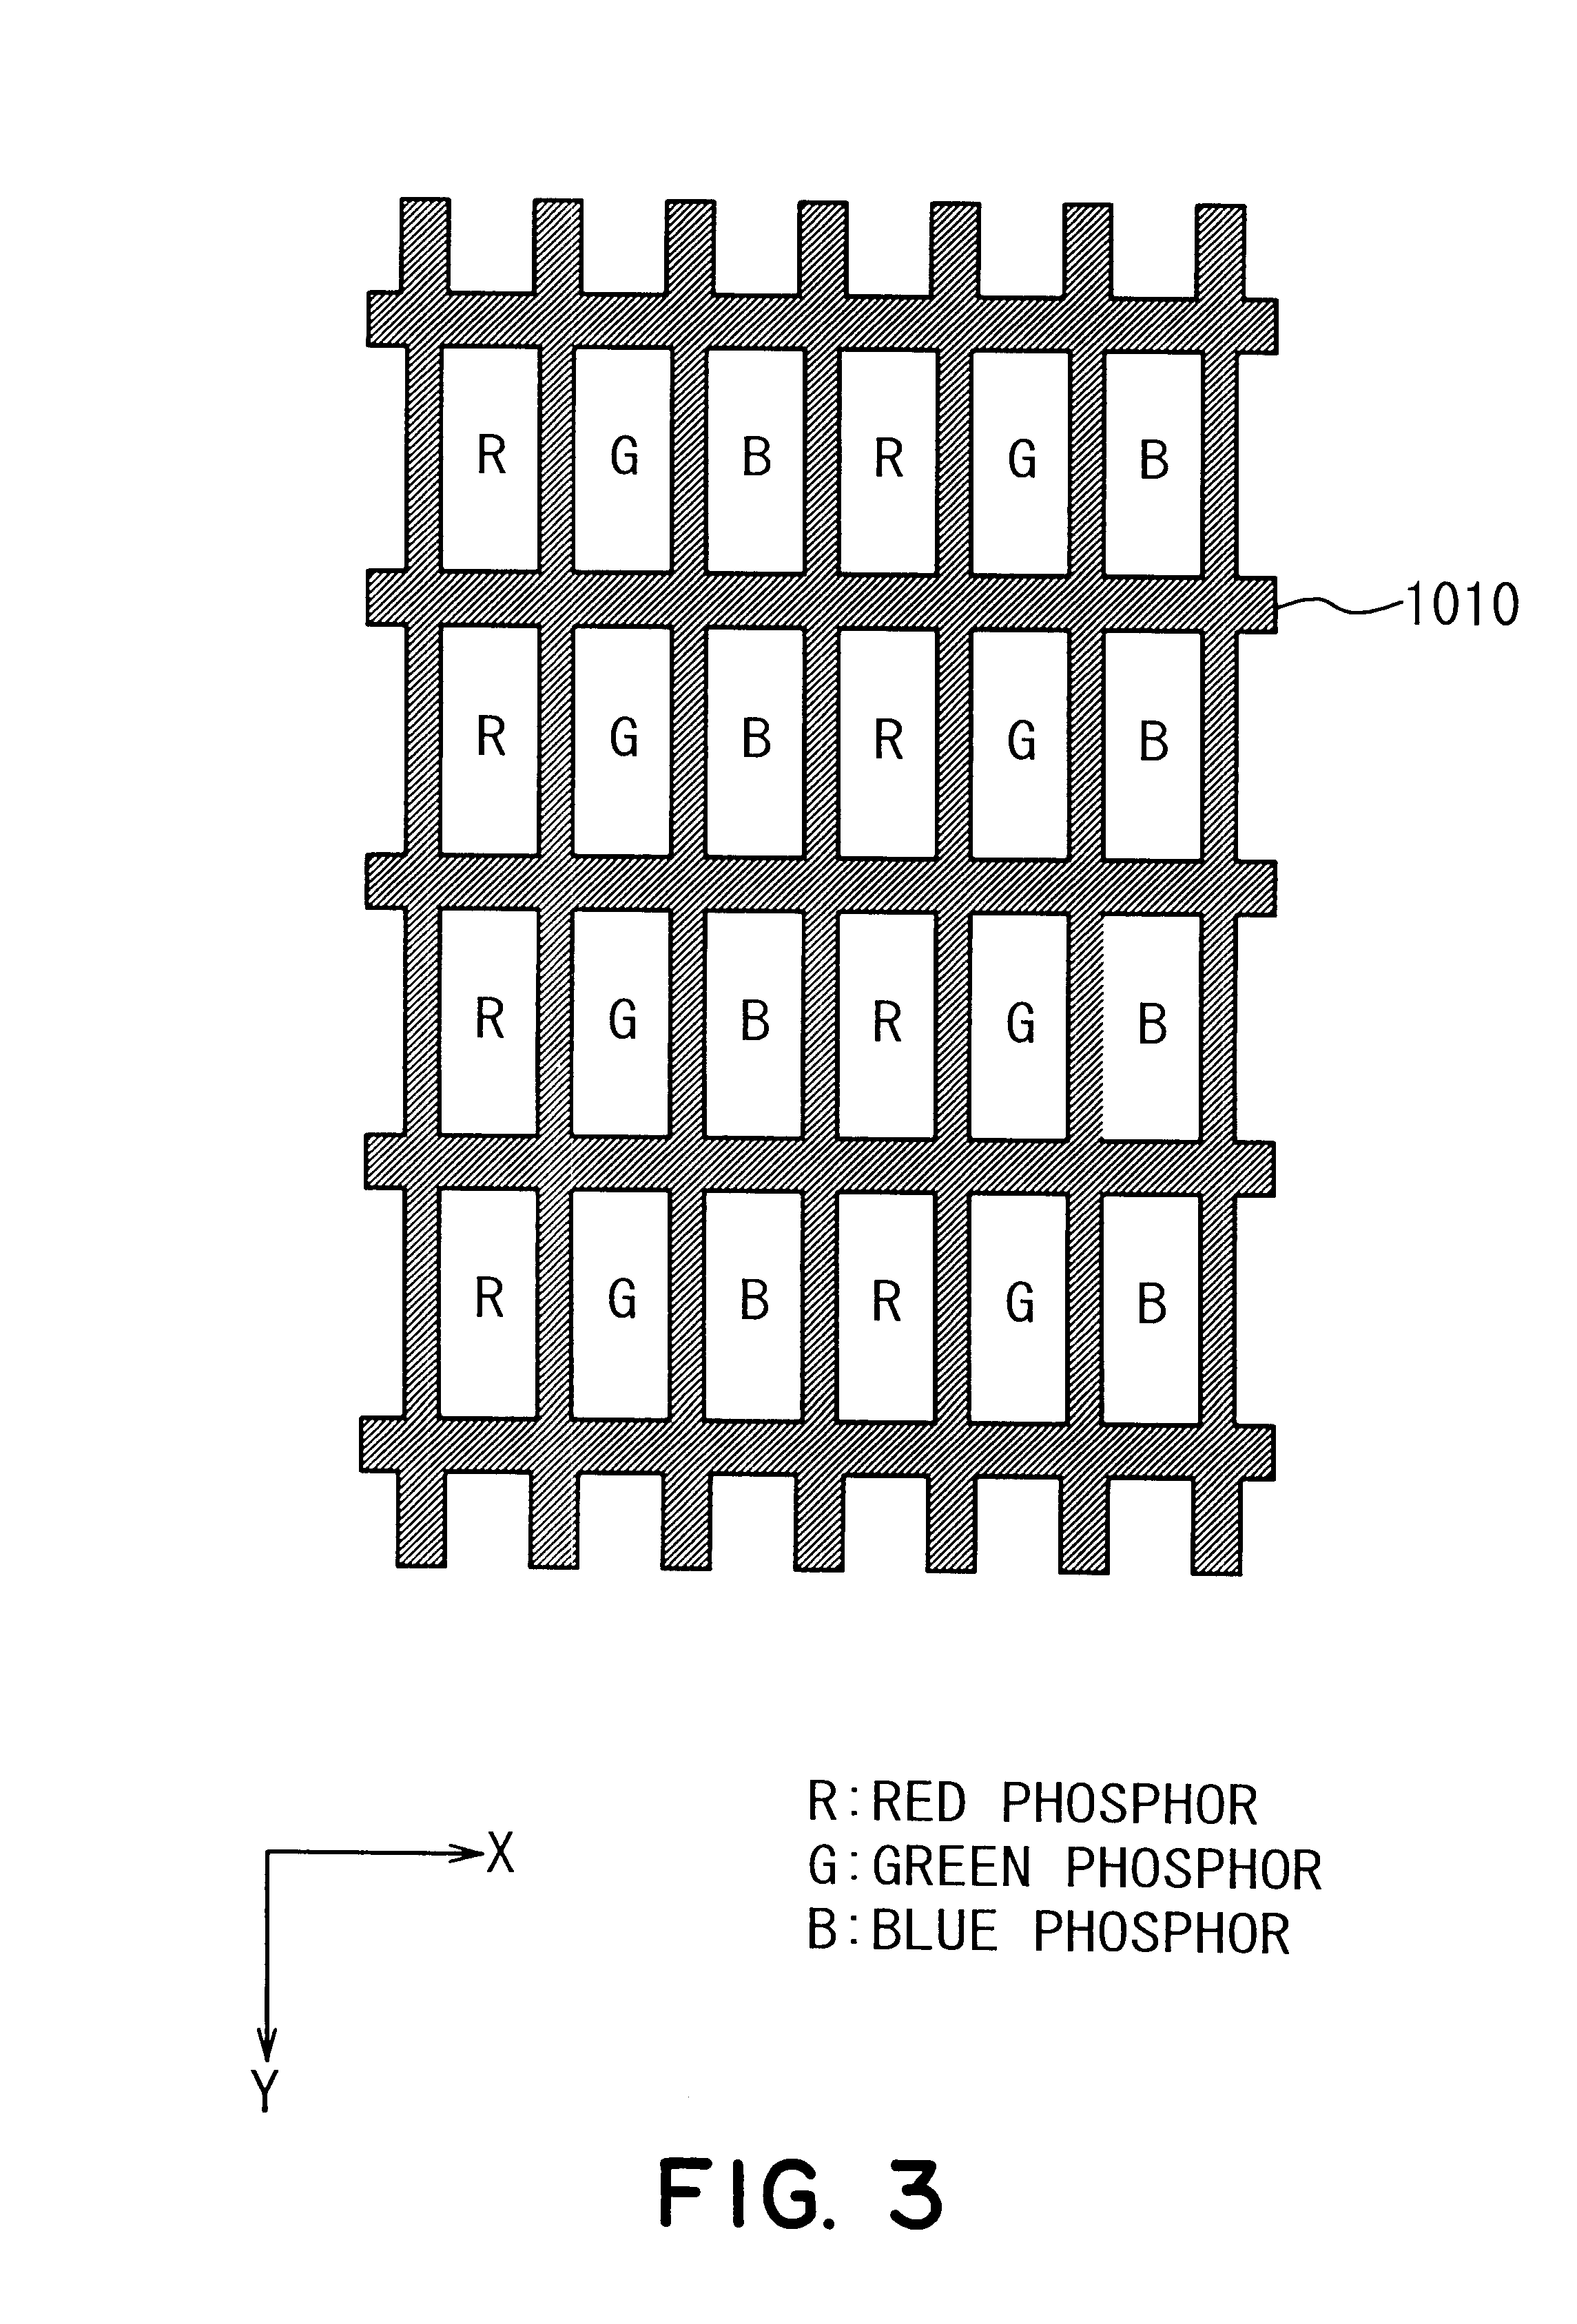 Image-forming apparatus and method of manufacturing the same